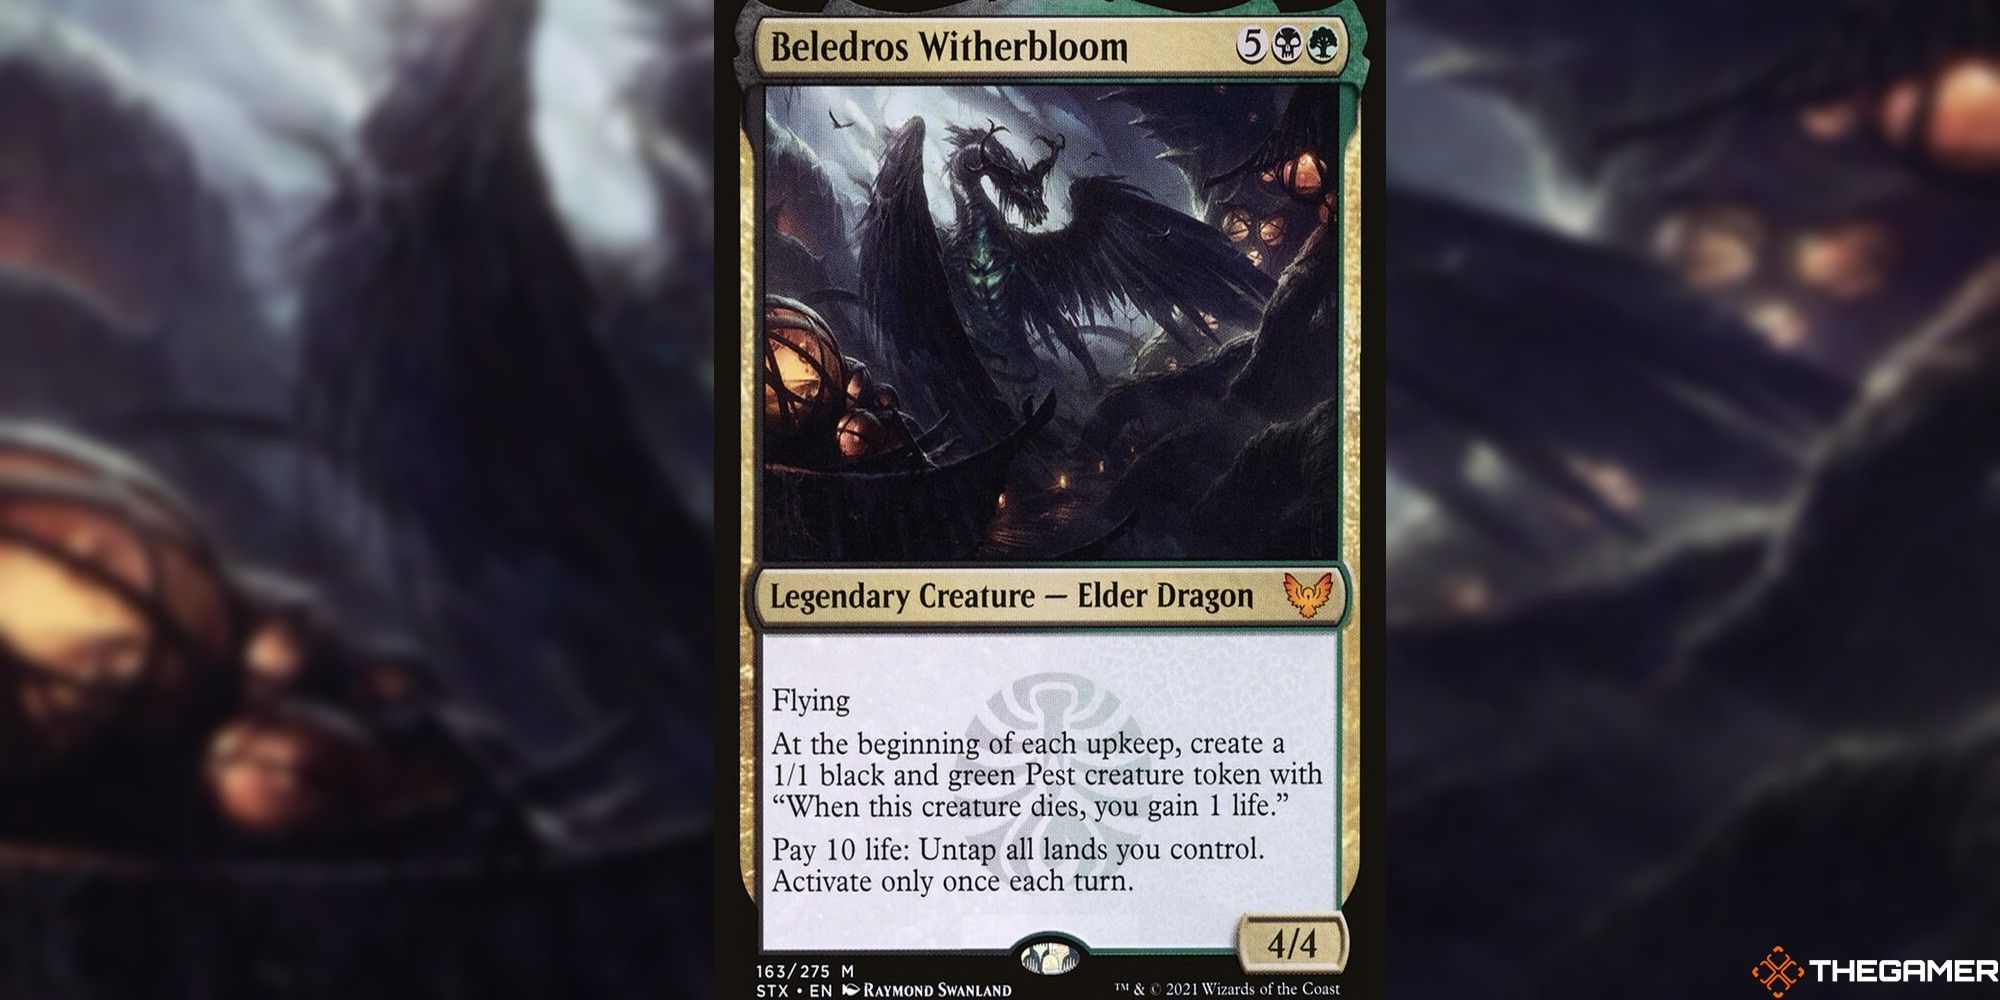 beledros witherbloom full card and art background